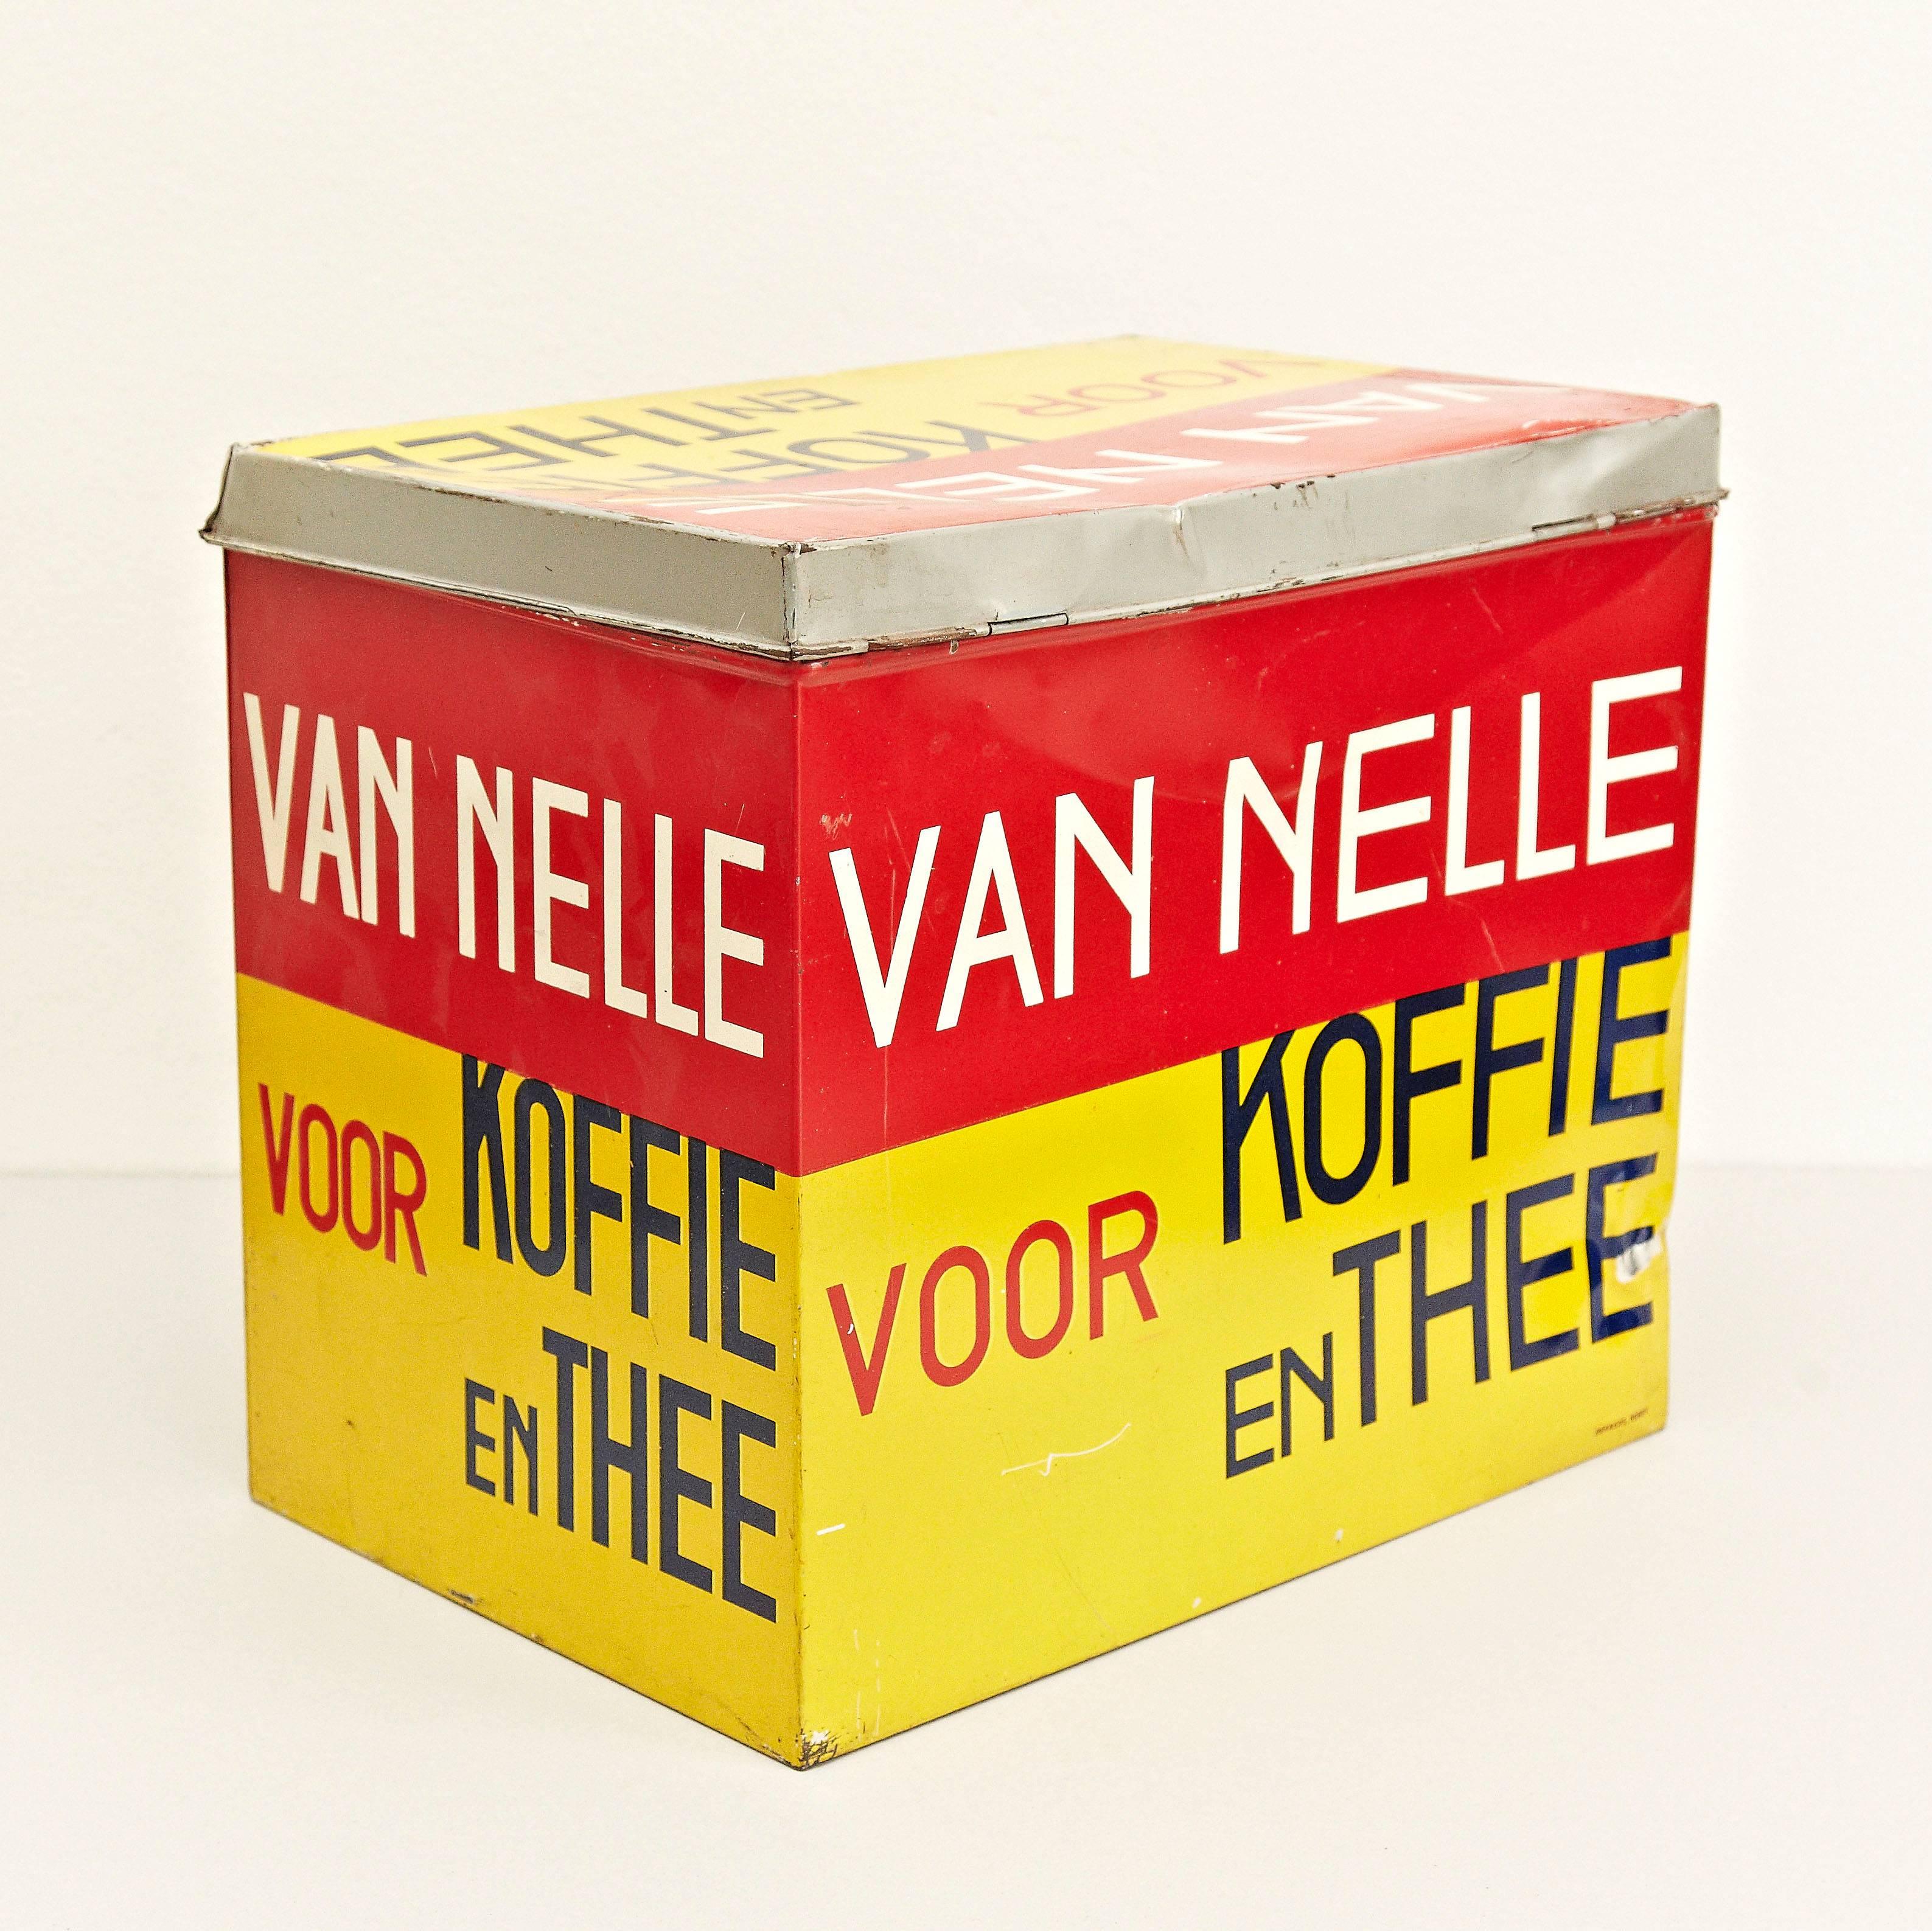 Tea box designed by Jacques Jongert circa 1930 in 'De Stijl' design manufactured for Van Nelle in Netherland.

Metal, painted in color

In good original condition, with minor wear consistent with age and use, preserving a beautiful patina.